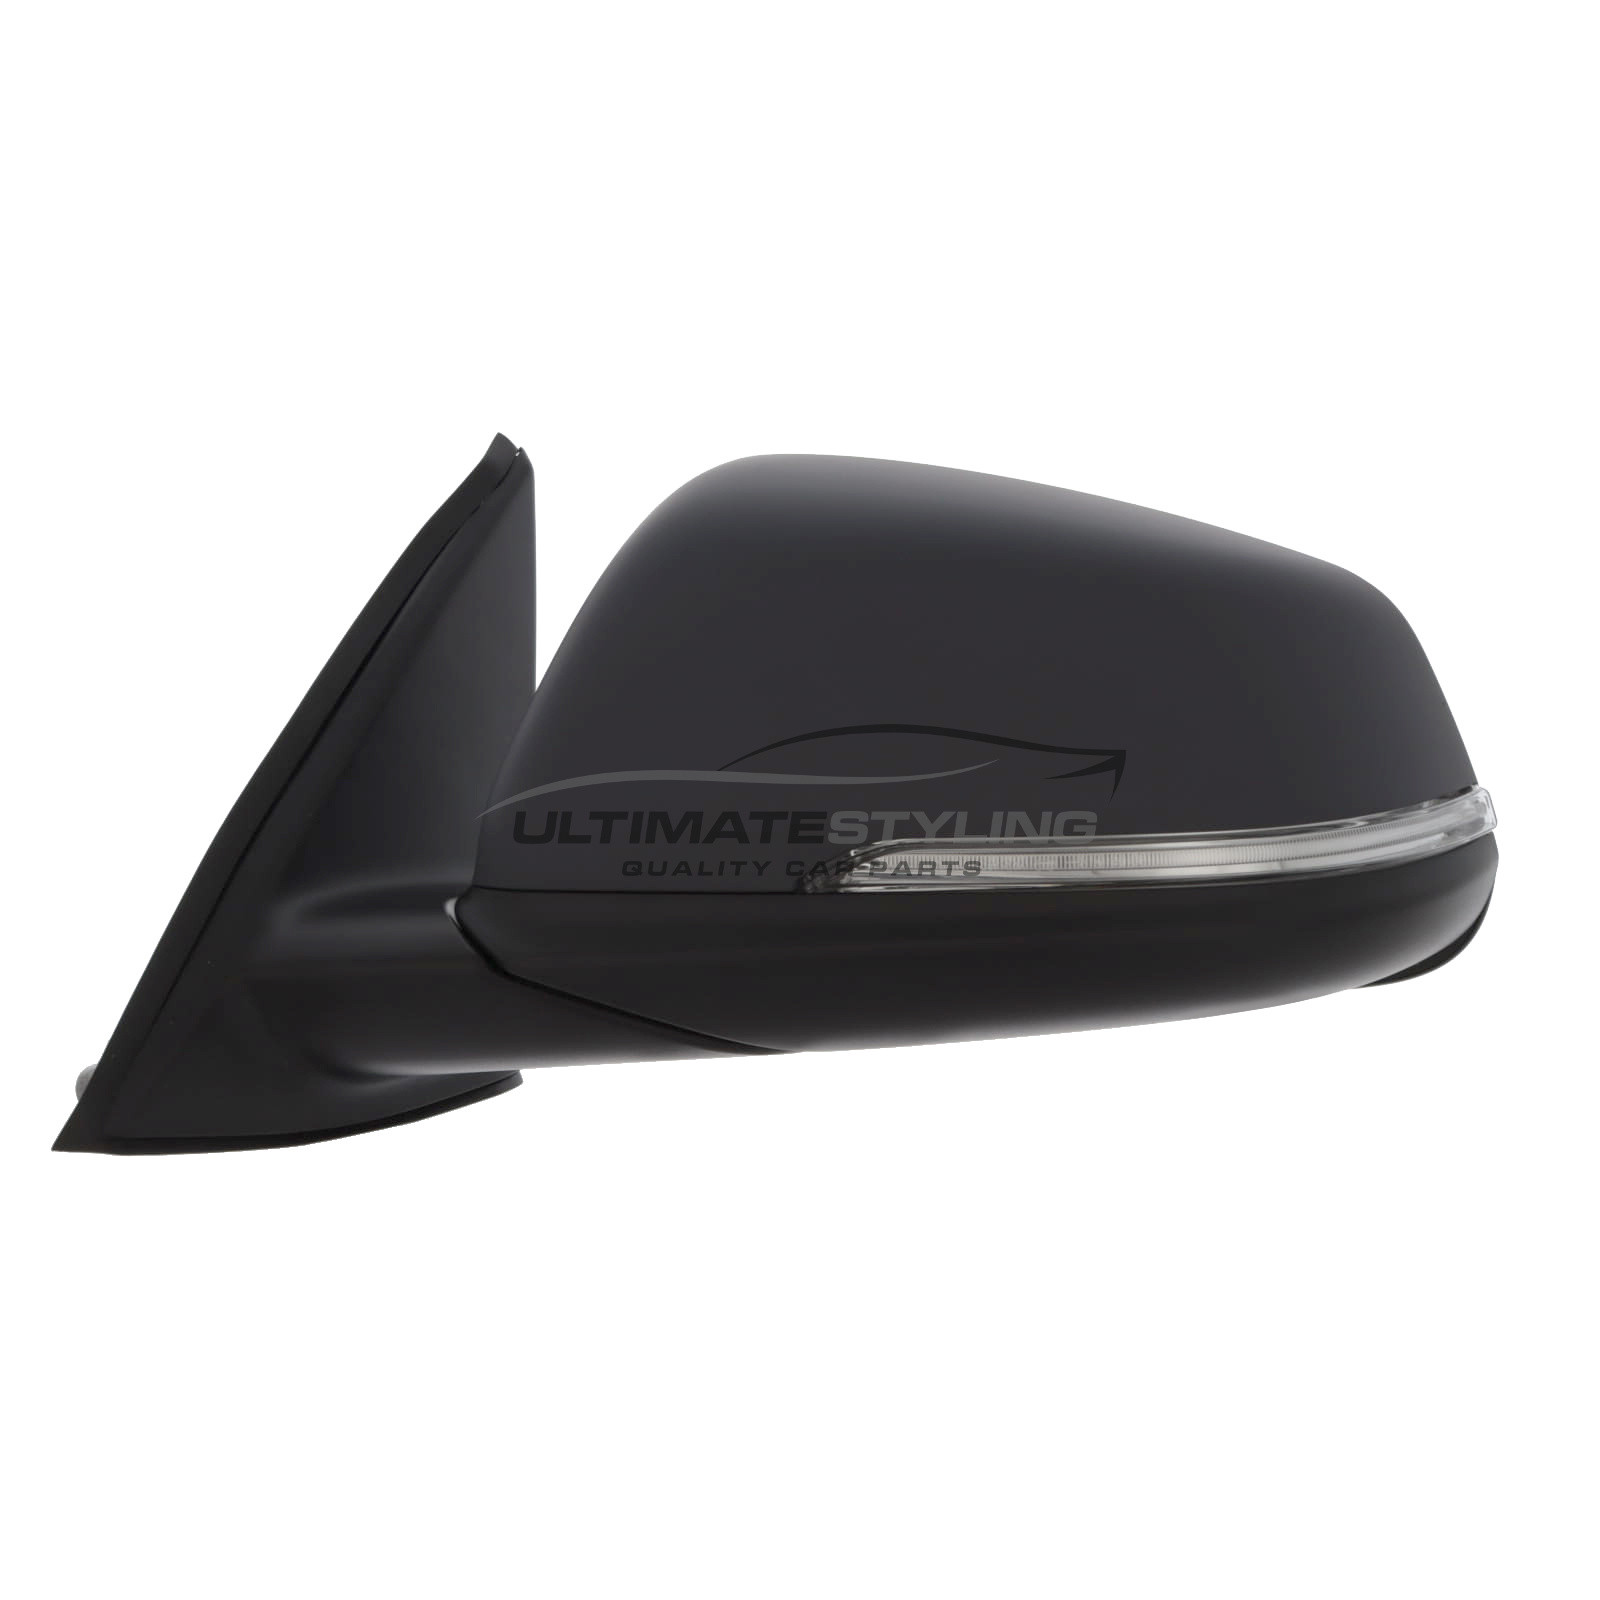 BMW X1 Wing Mirror / Door Mirror - Passenger Side (LH) - Electric adjustment - Heated Glass - Power Folding - Indicator - Primed